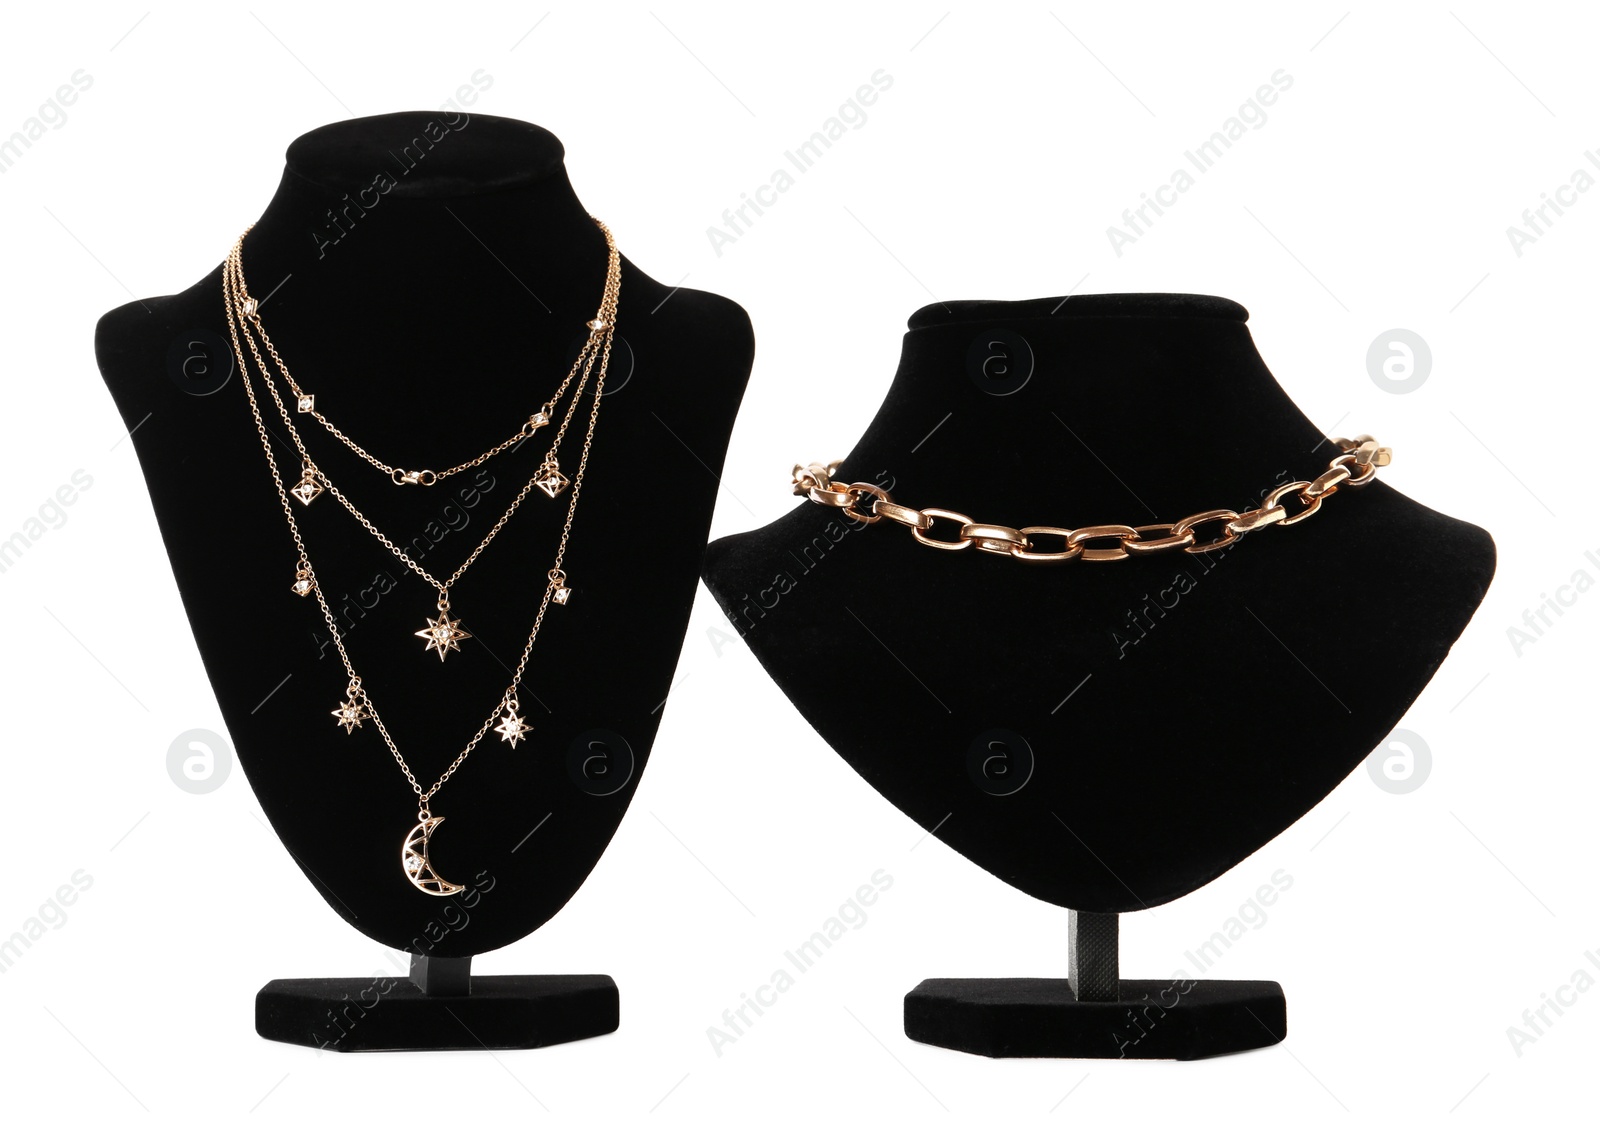 Photo of Stylish necklaces on jewelry busts against white background